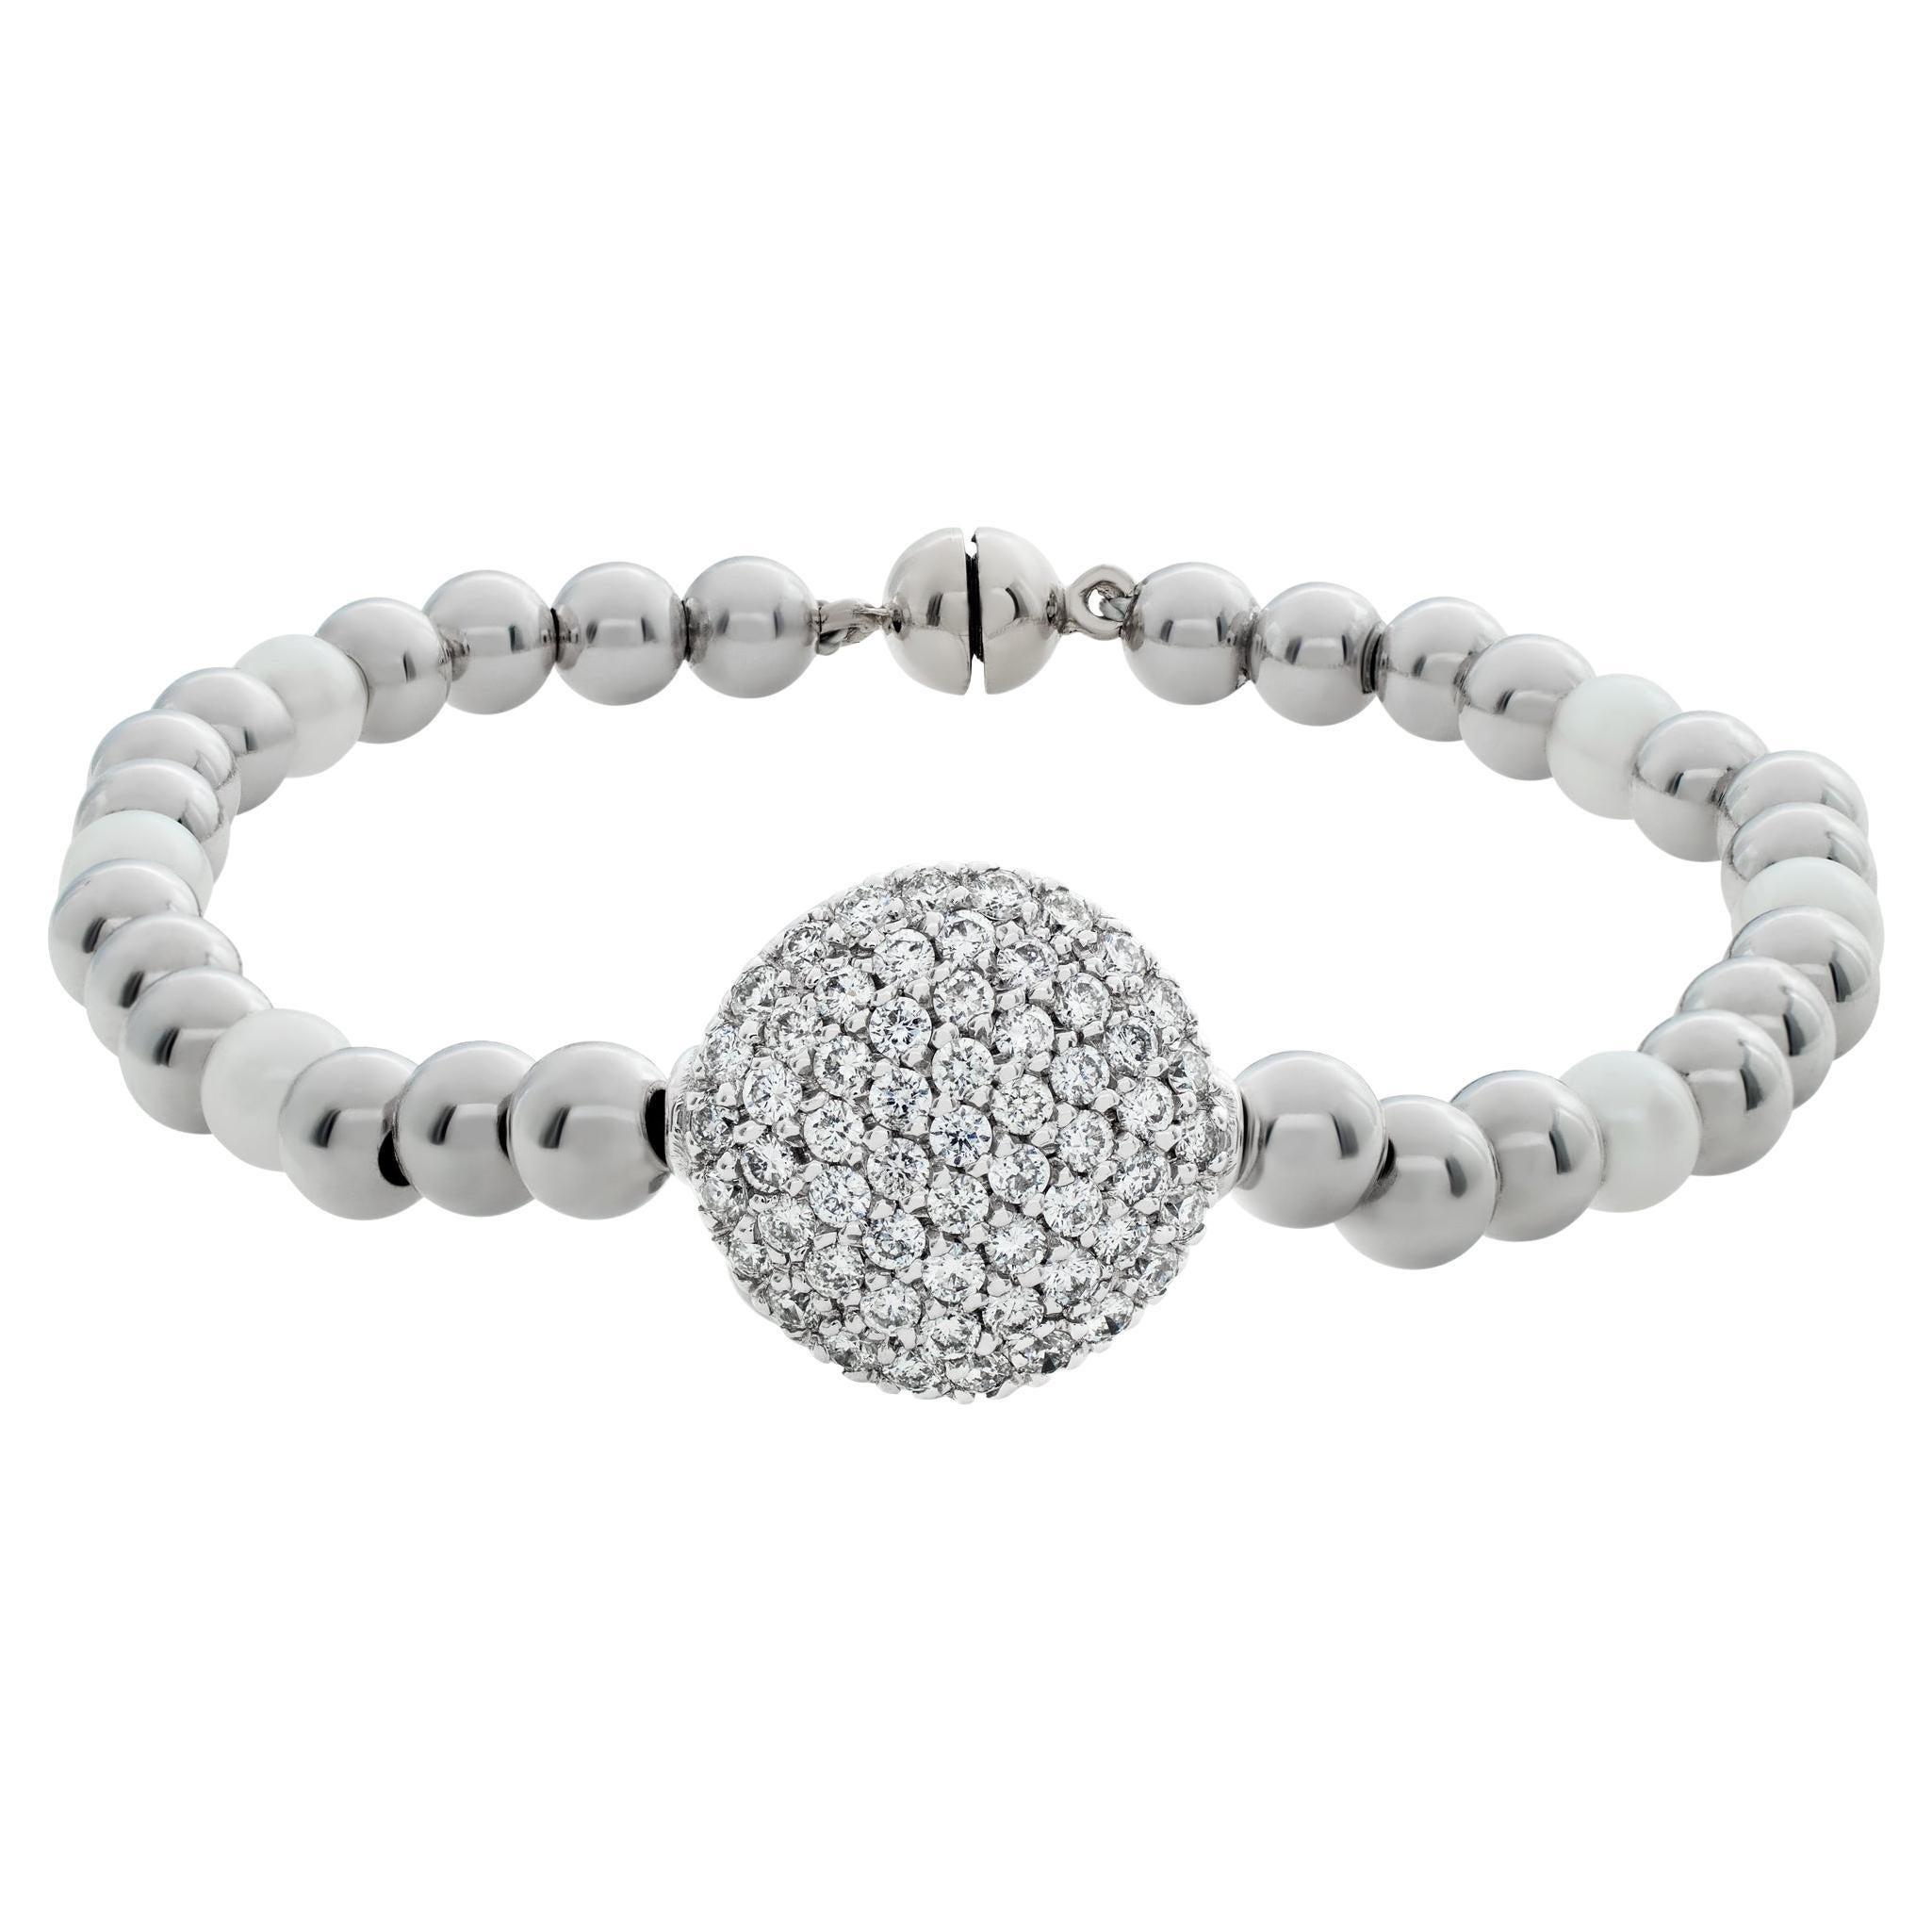 A&G signed beads and pave diamonds buttons bracelet in 14k white gold